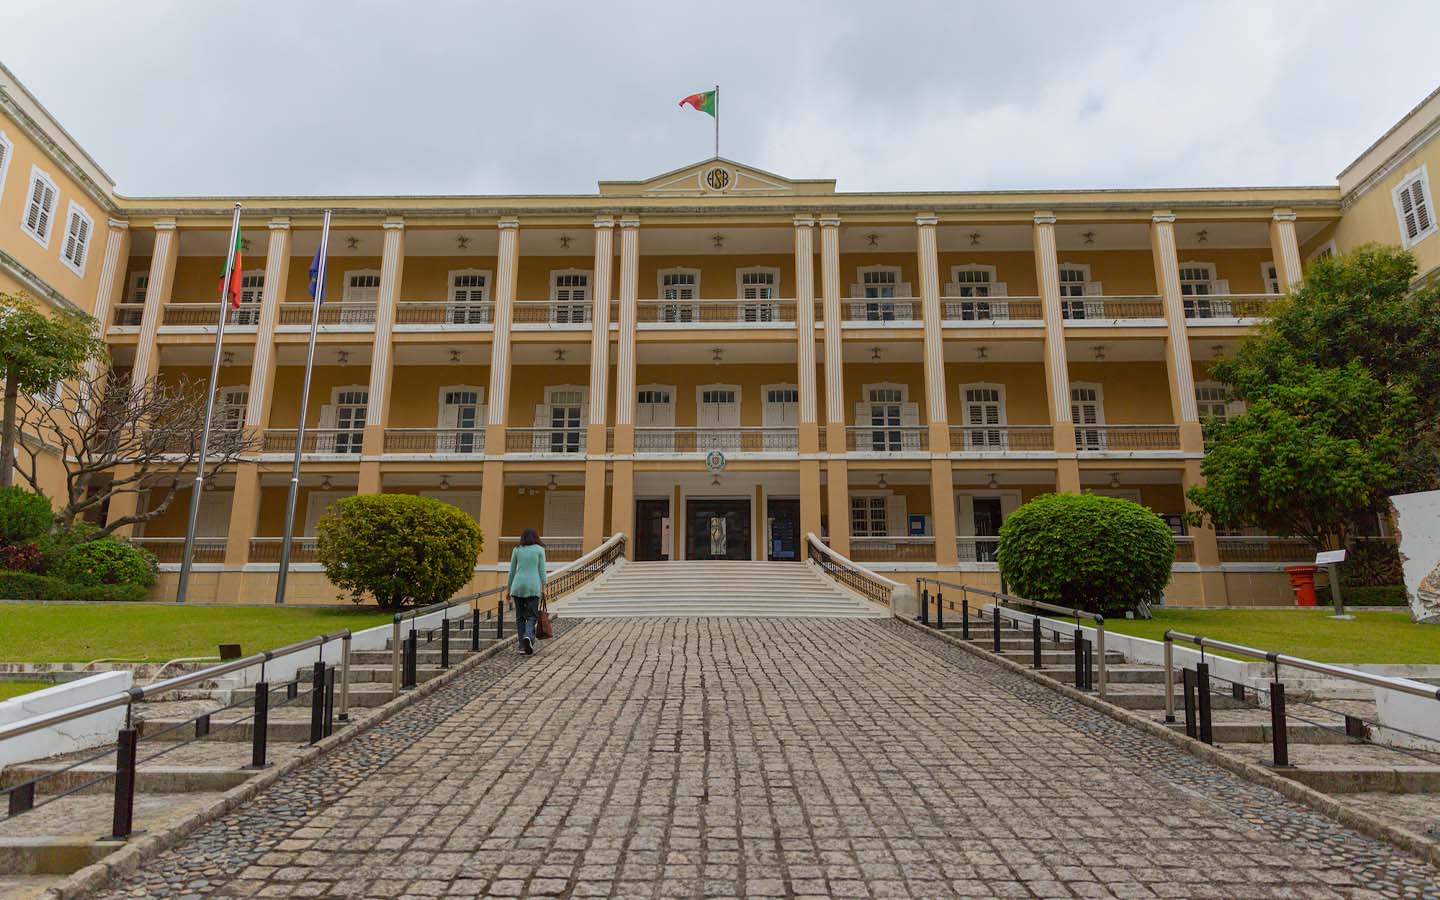 The Portuguese consulate actually has vacant appointment slots 